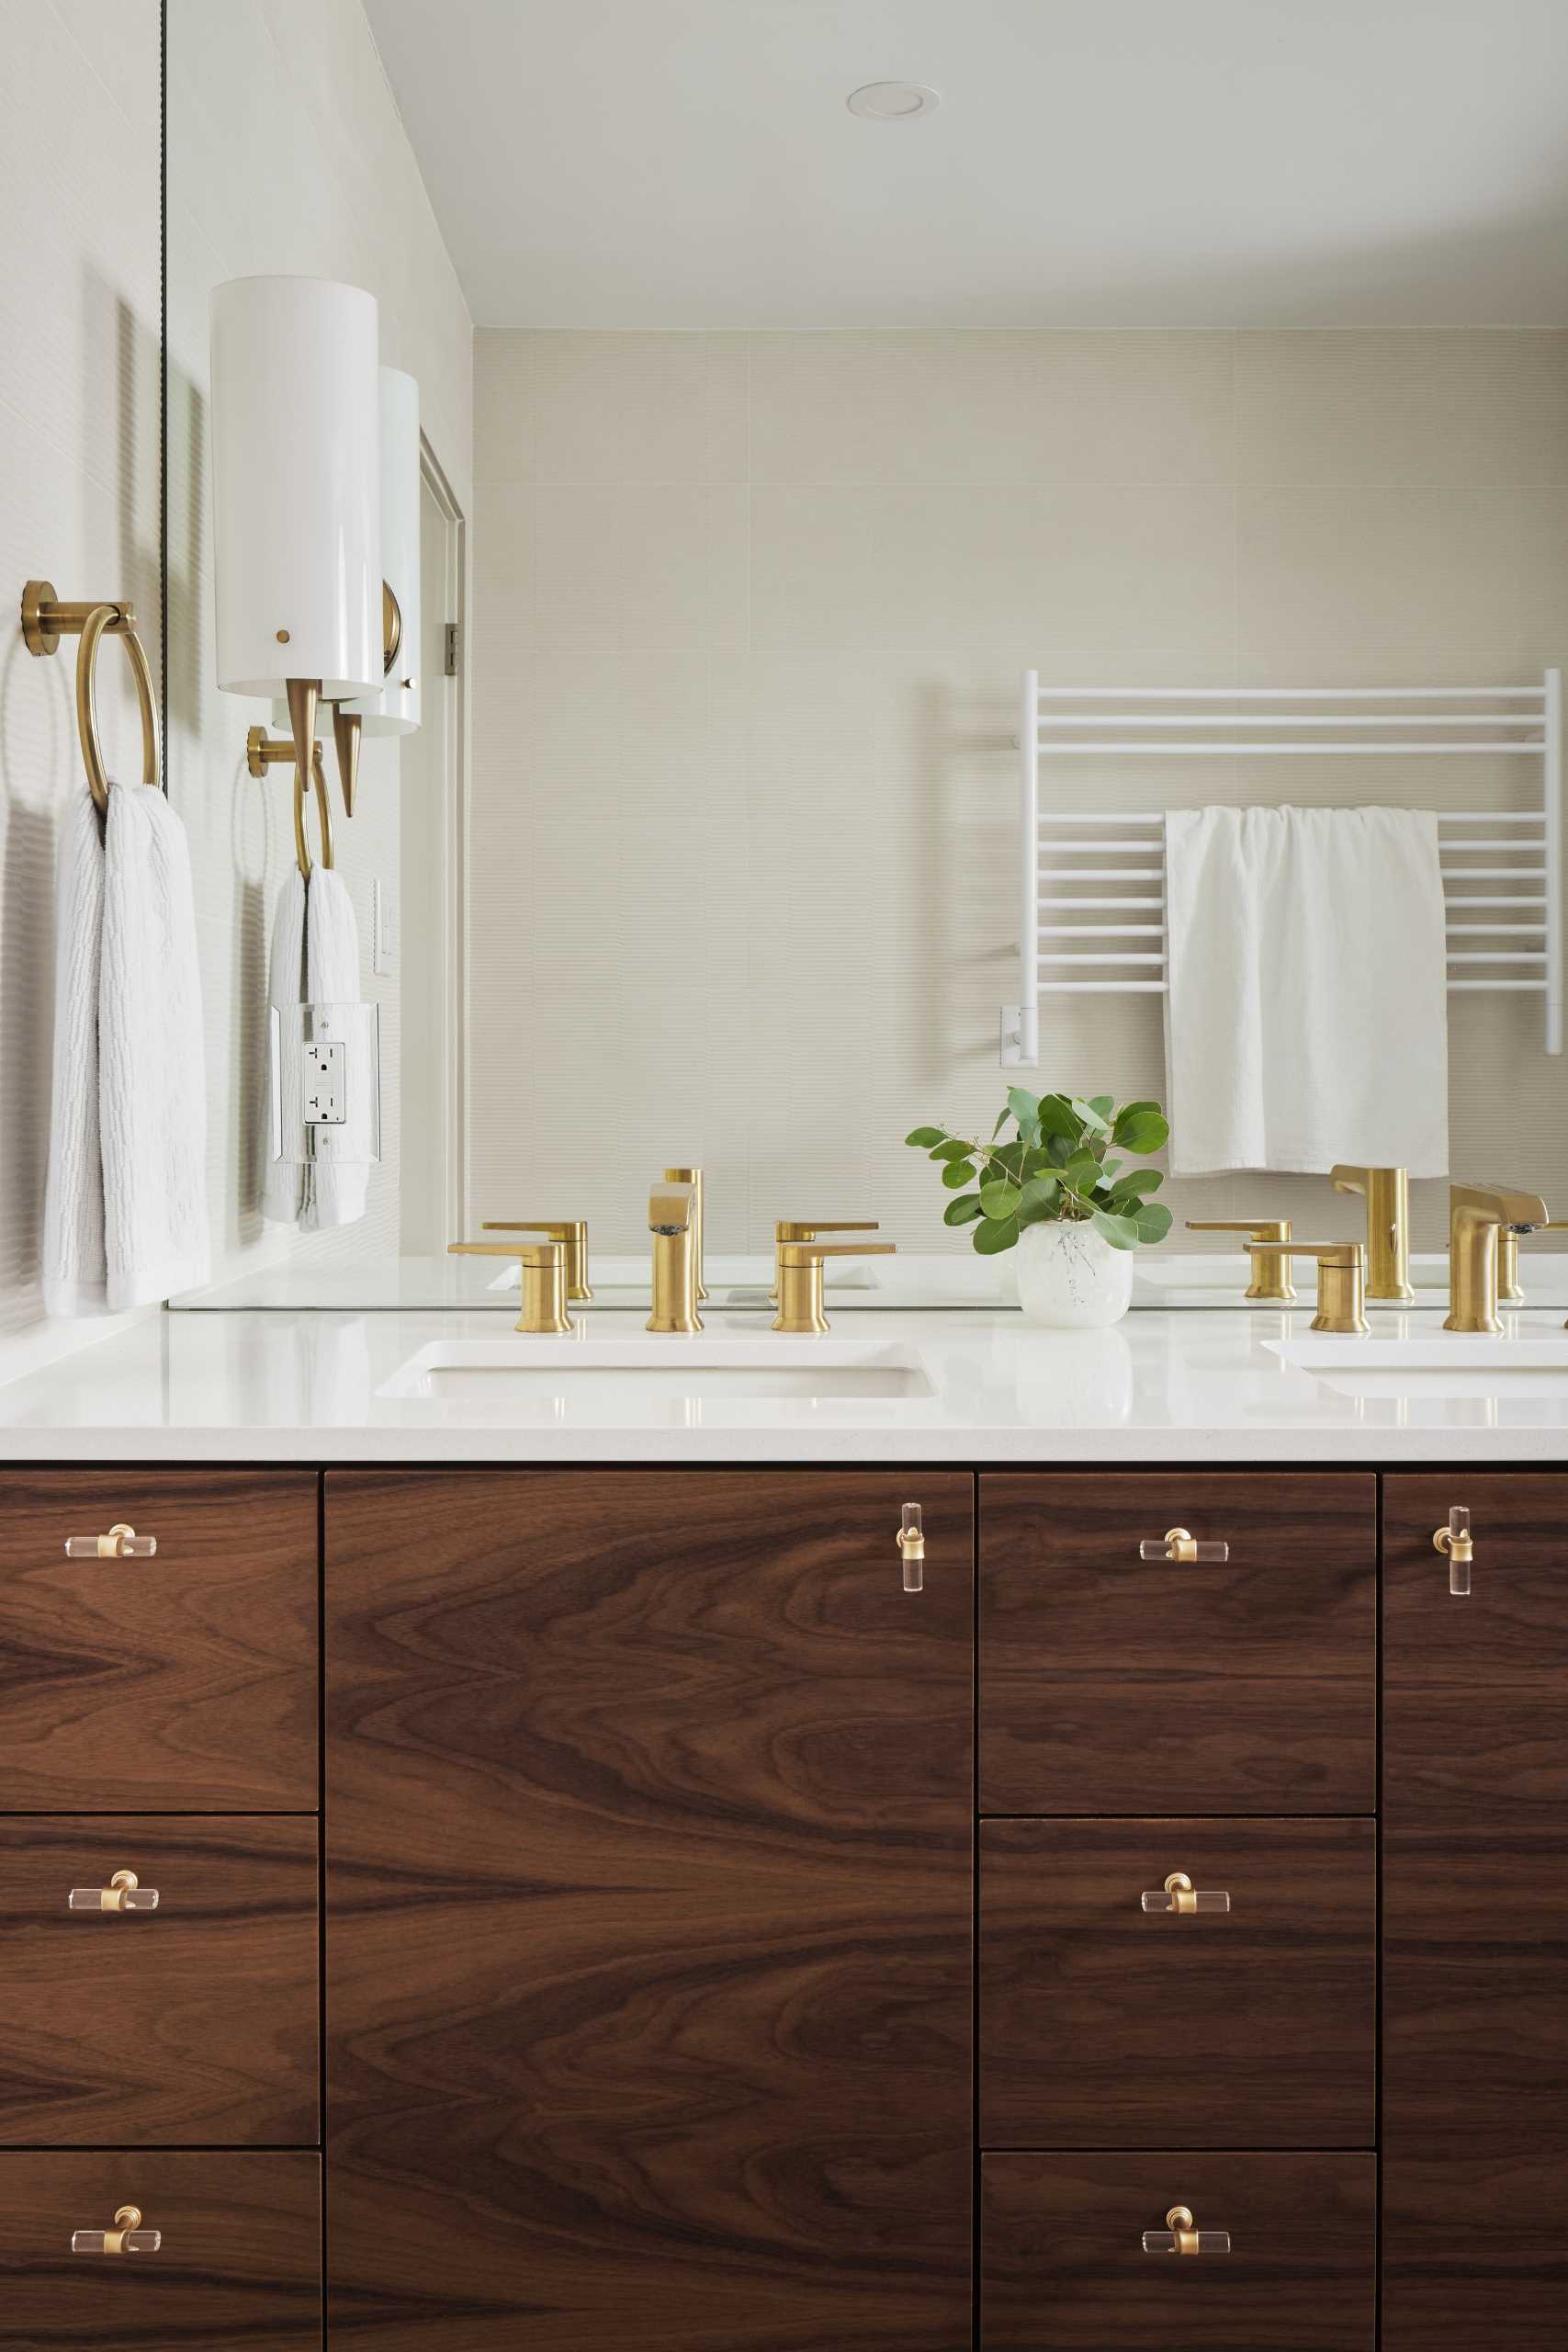 AFTER - This updated main bathroom has a sense of sophistication, with a double vanity with walnut cabinetry, metallic hardware, and a large mirror. In the shower, the glass block wall has been replaced with a solid wall, and the shower curtain has been replaced by a glass shower screen.